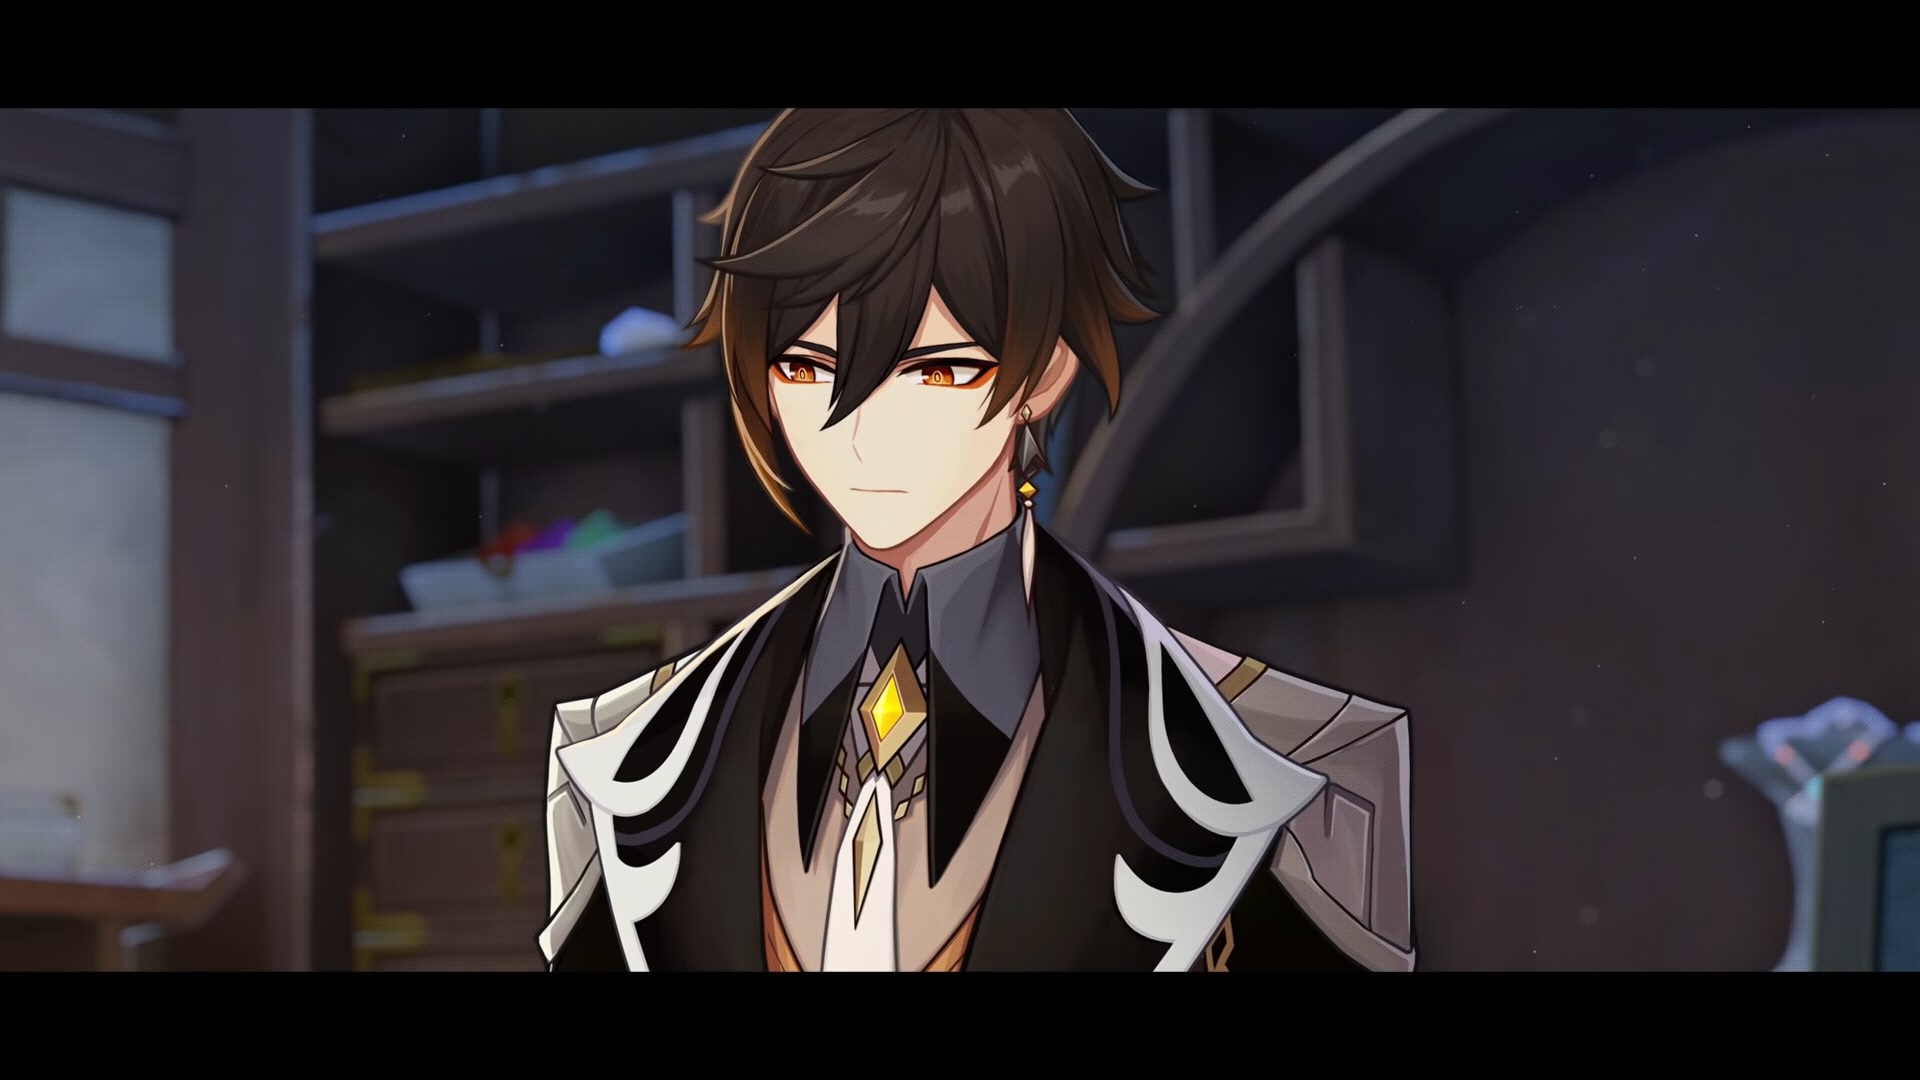 Genshin Impact Zhongli Trailer Introduces the Mysterious ‘Consultant’